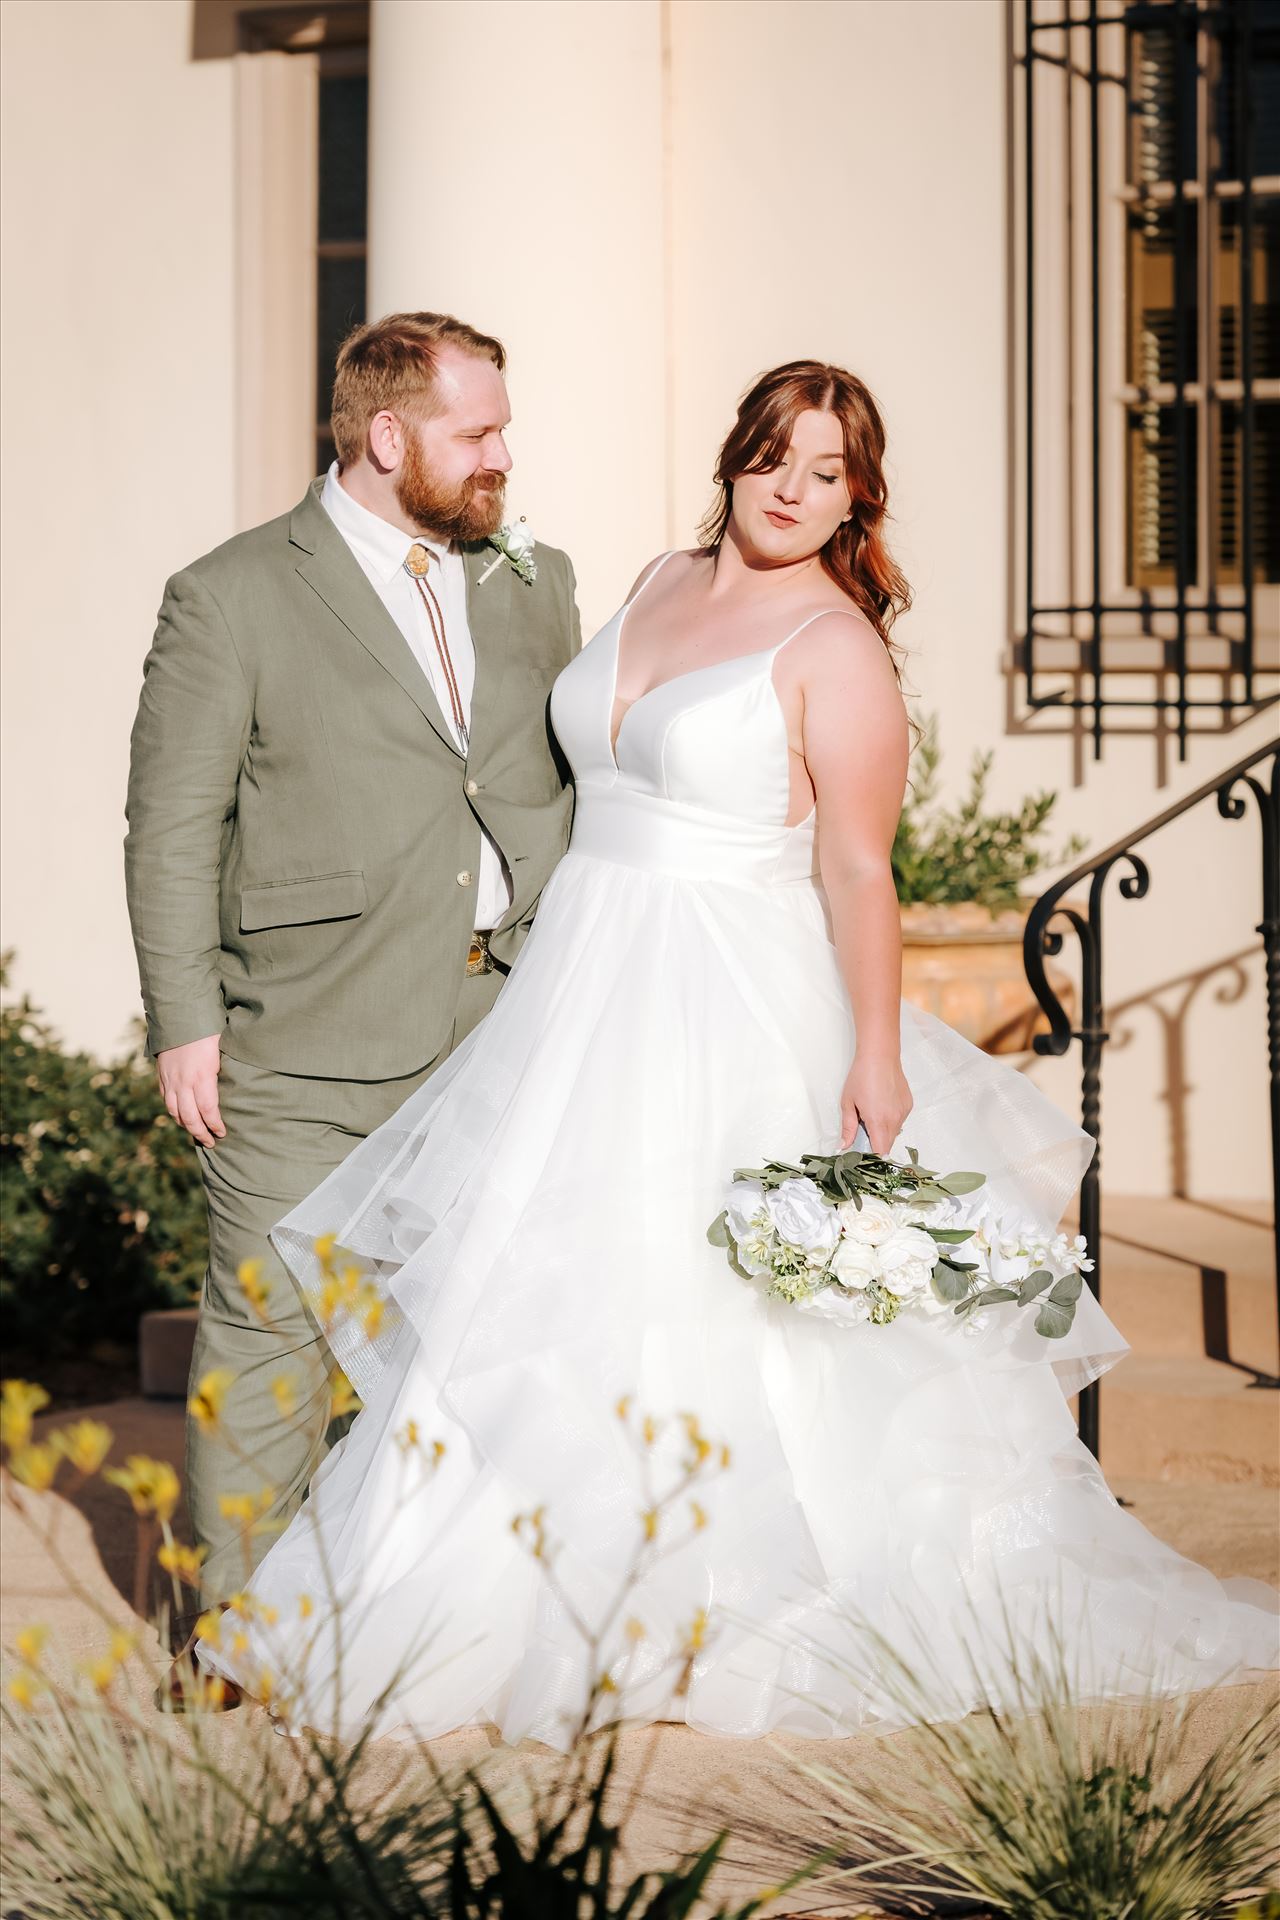 Final-4785.jpgThe Monday Club Wedding San Luis Obispo California in San Luis Obispo County by Mirror's Edge Photography.  Amazing venue for intimate weddings with mountain views. Classic Sunset Wedding Bride and Groom with boho chic flair. Classic Magazine Couple